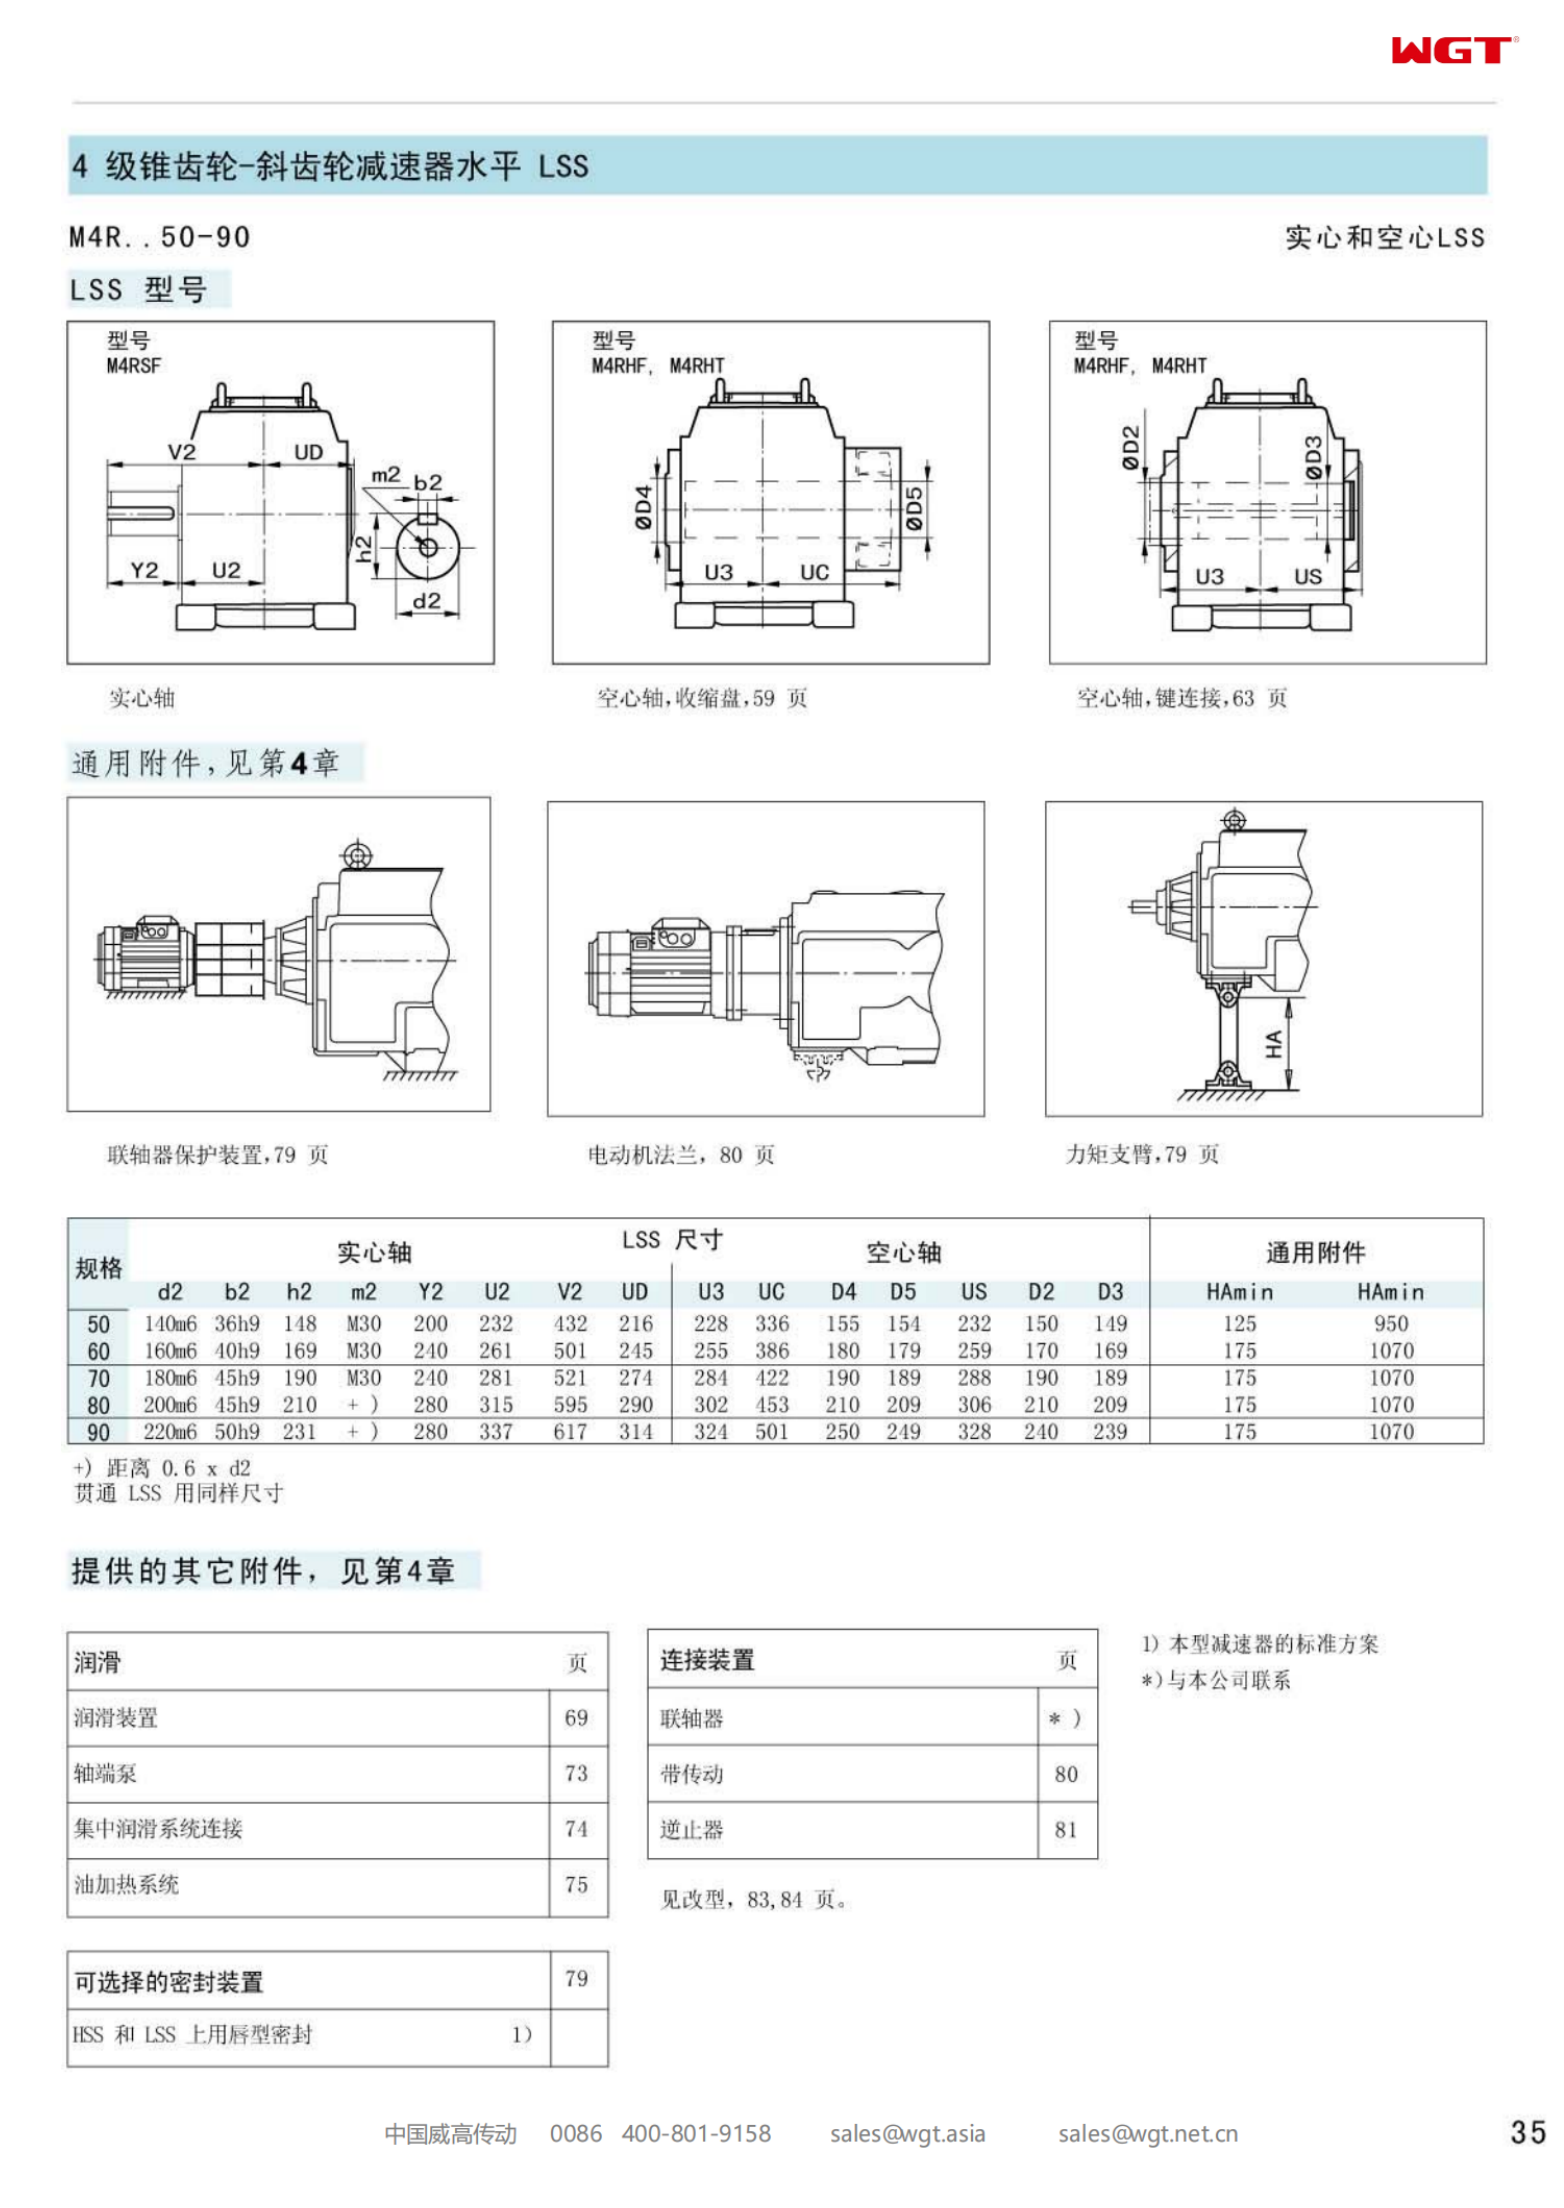 M4RHT90 Replace_SEW_M_Series Gearbox